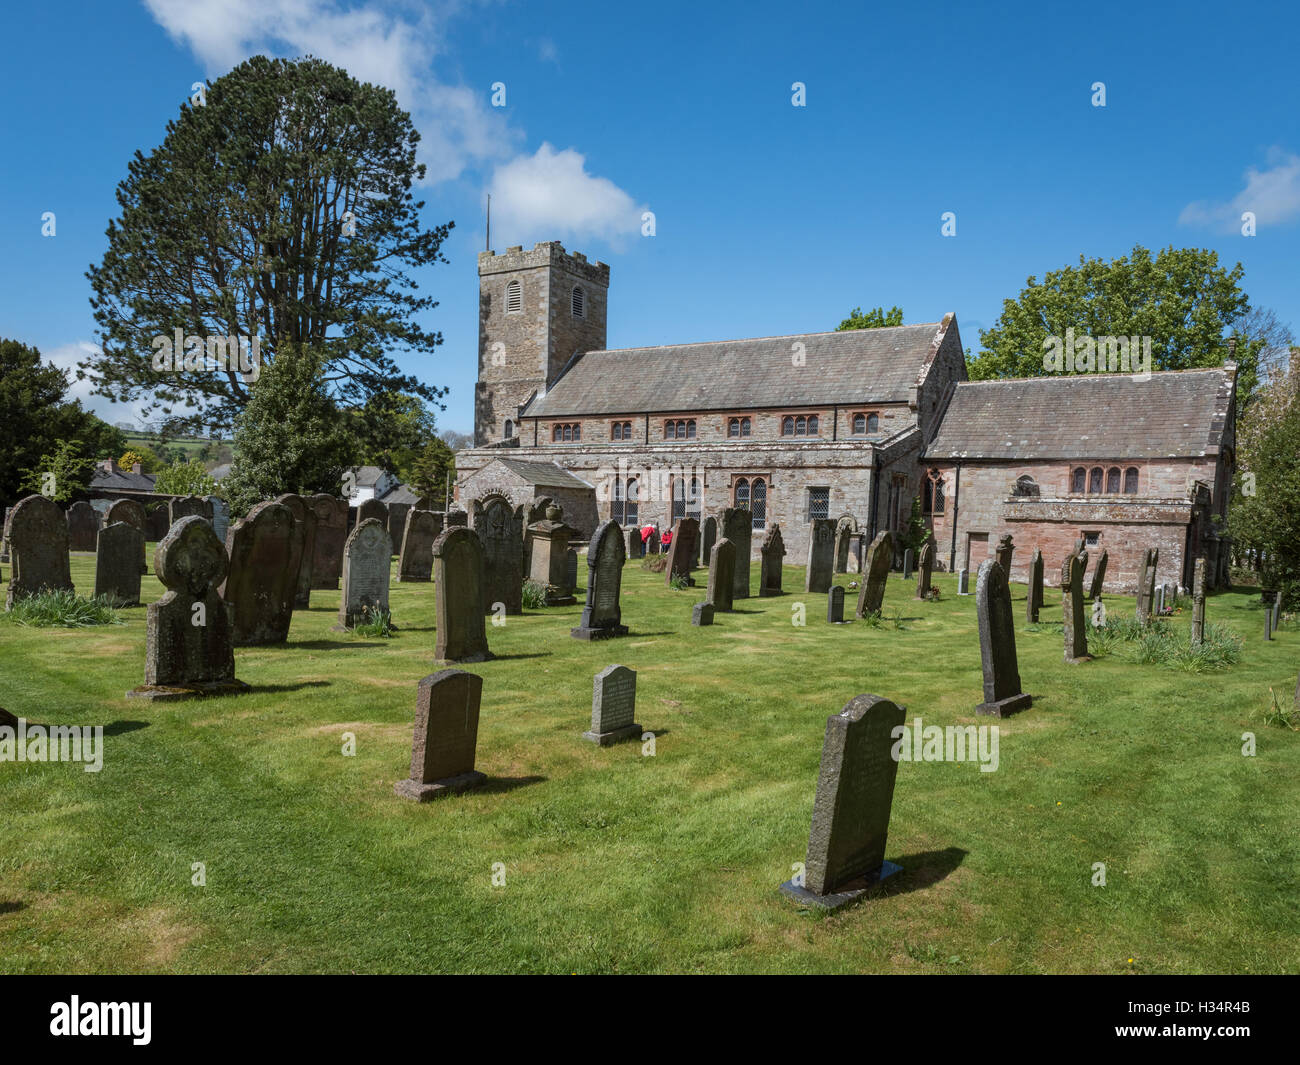 Church in the village of Caldbeck, Cumbria, England Stock Photo